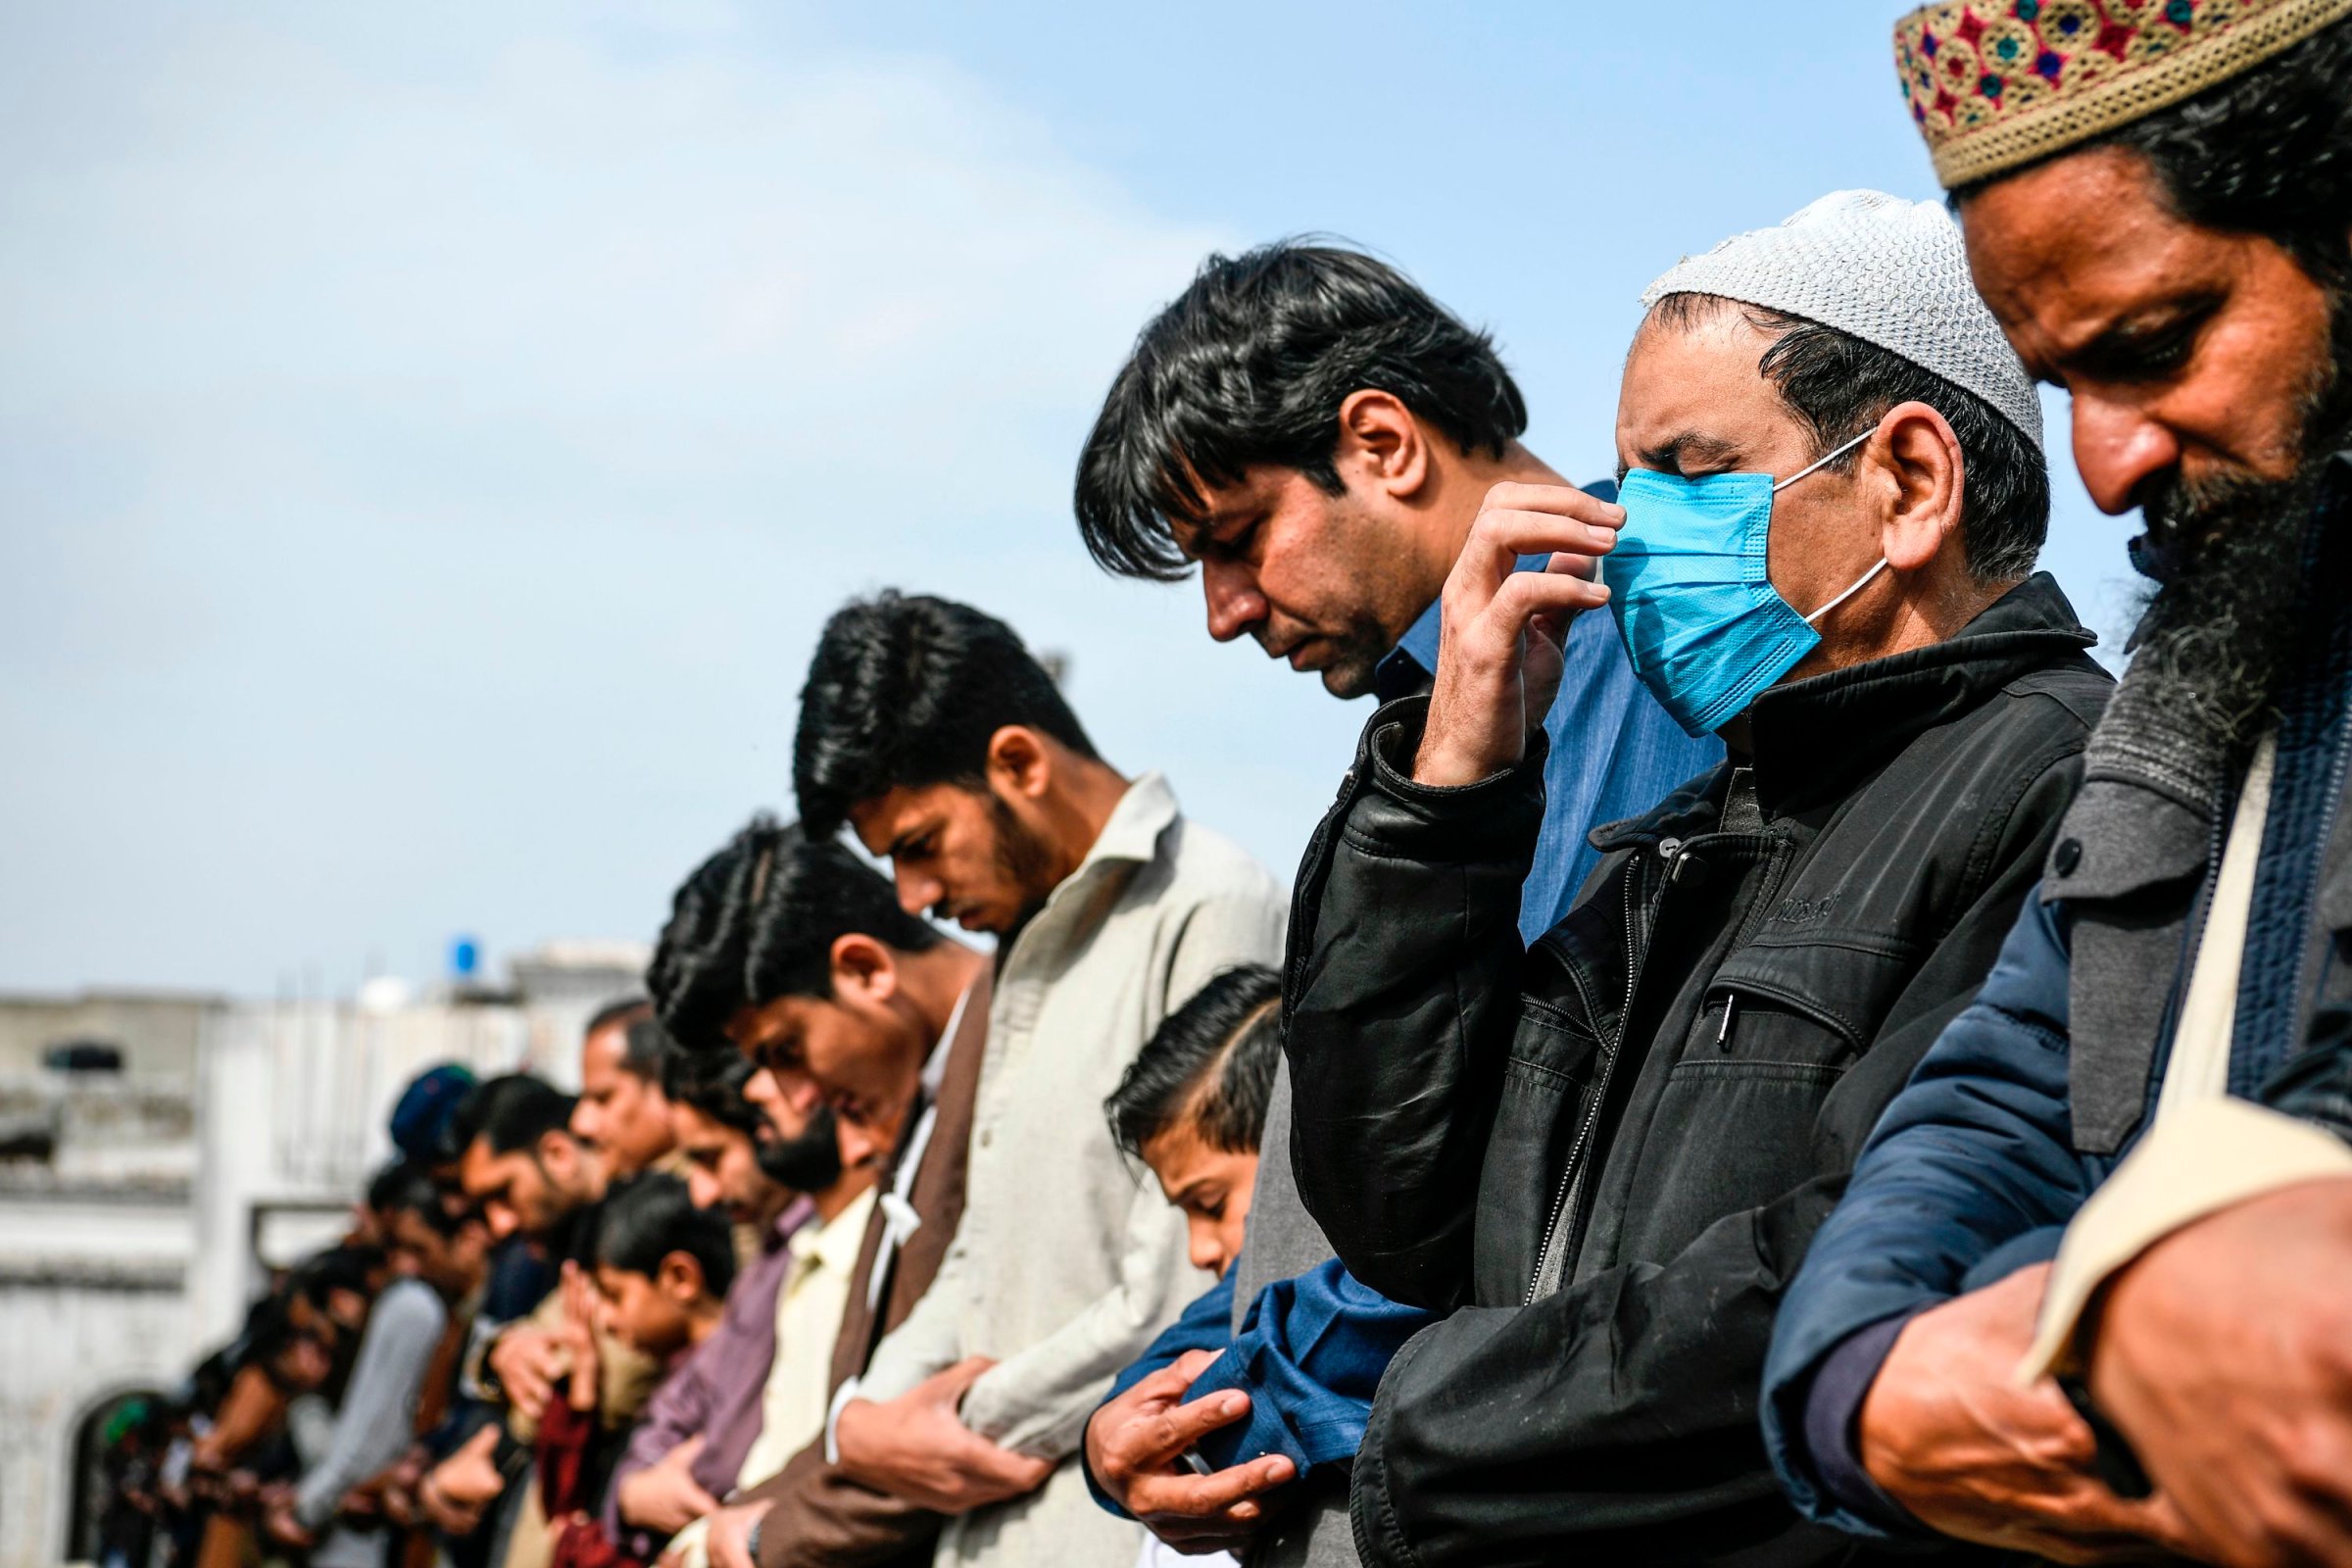 A resident (R) wearing a facemask as a preventive measure against the spread of the COVID-19 coronavirus offers Friday prayers along with other Muslims at a mosque in Rawalpindi on March 13, 2020.